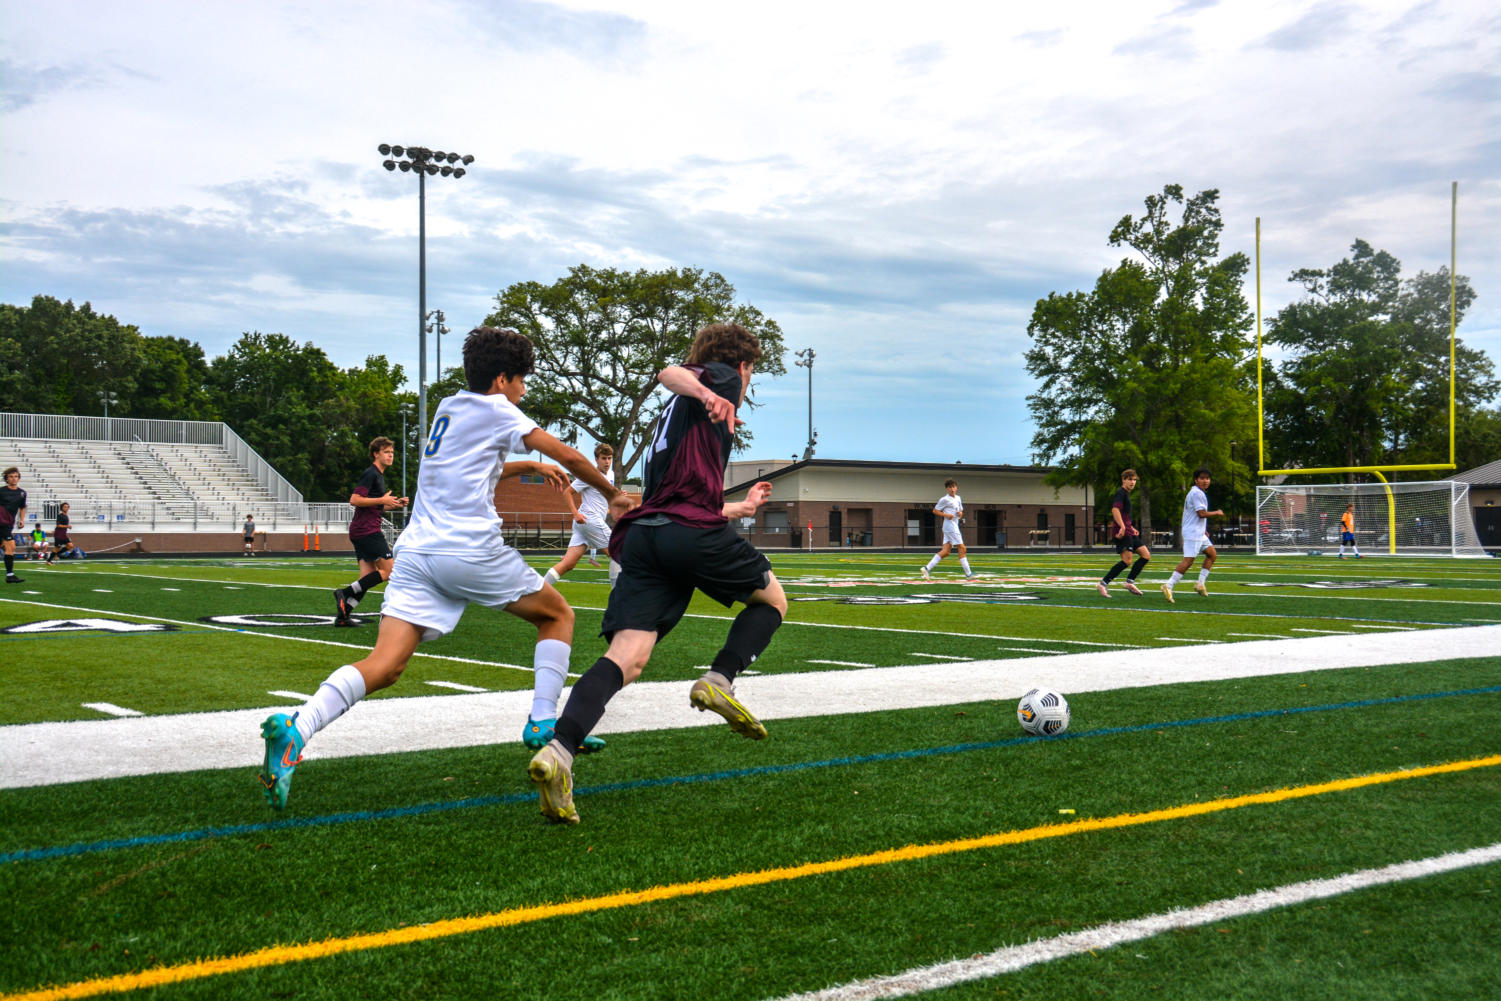 Senior Shane Zins runs after the soccer ball, trying to get it before his opponent.